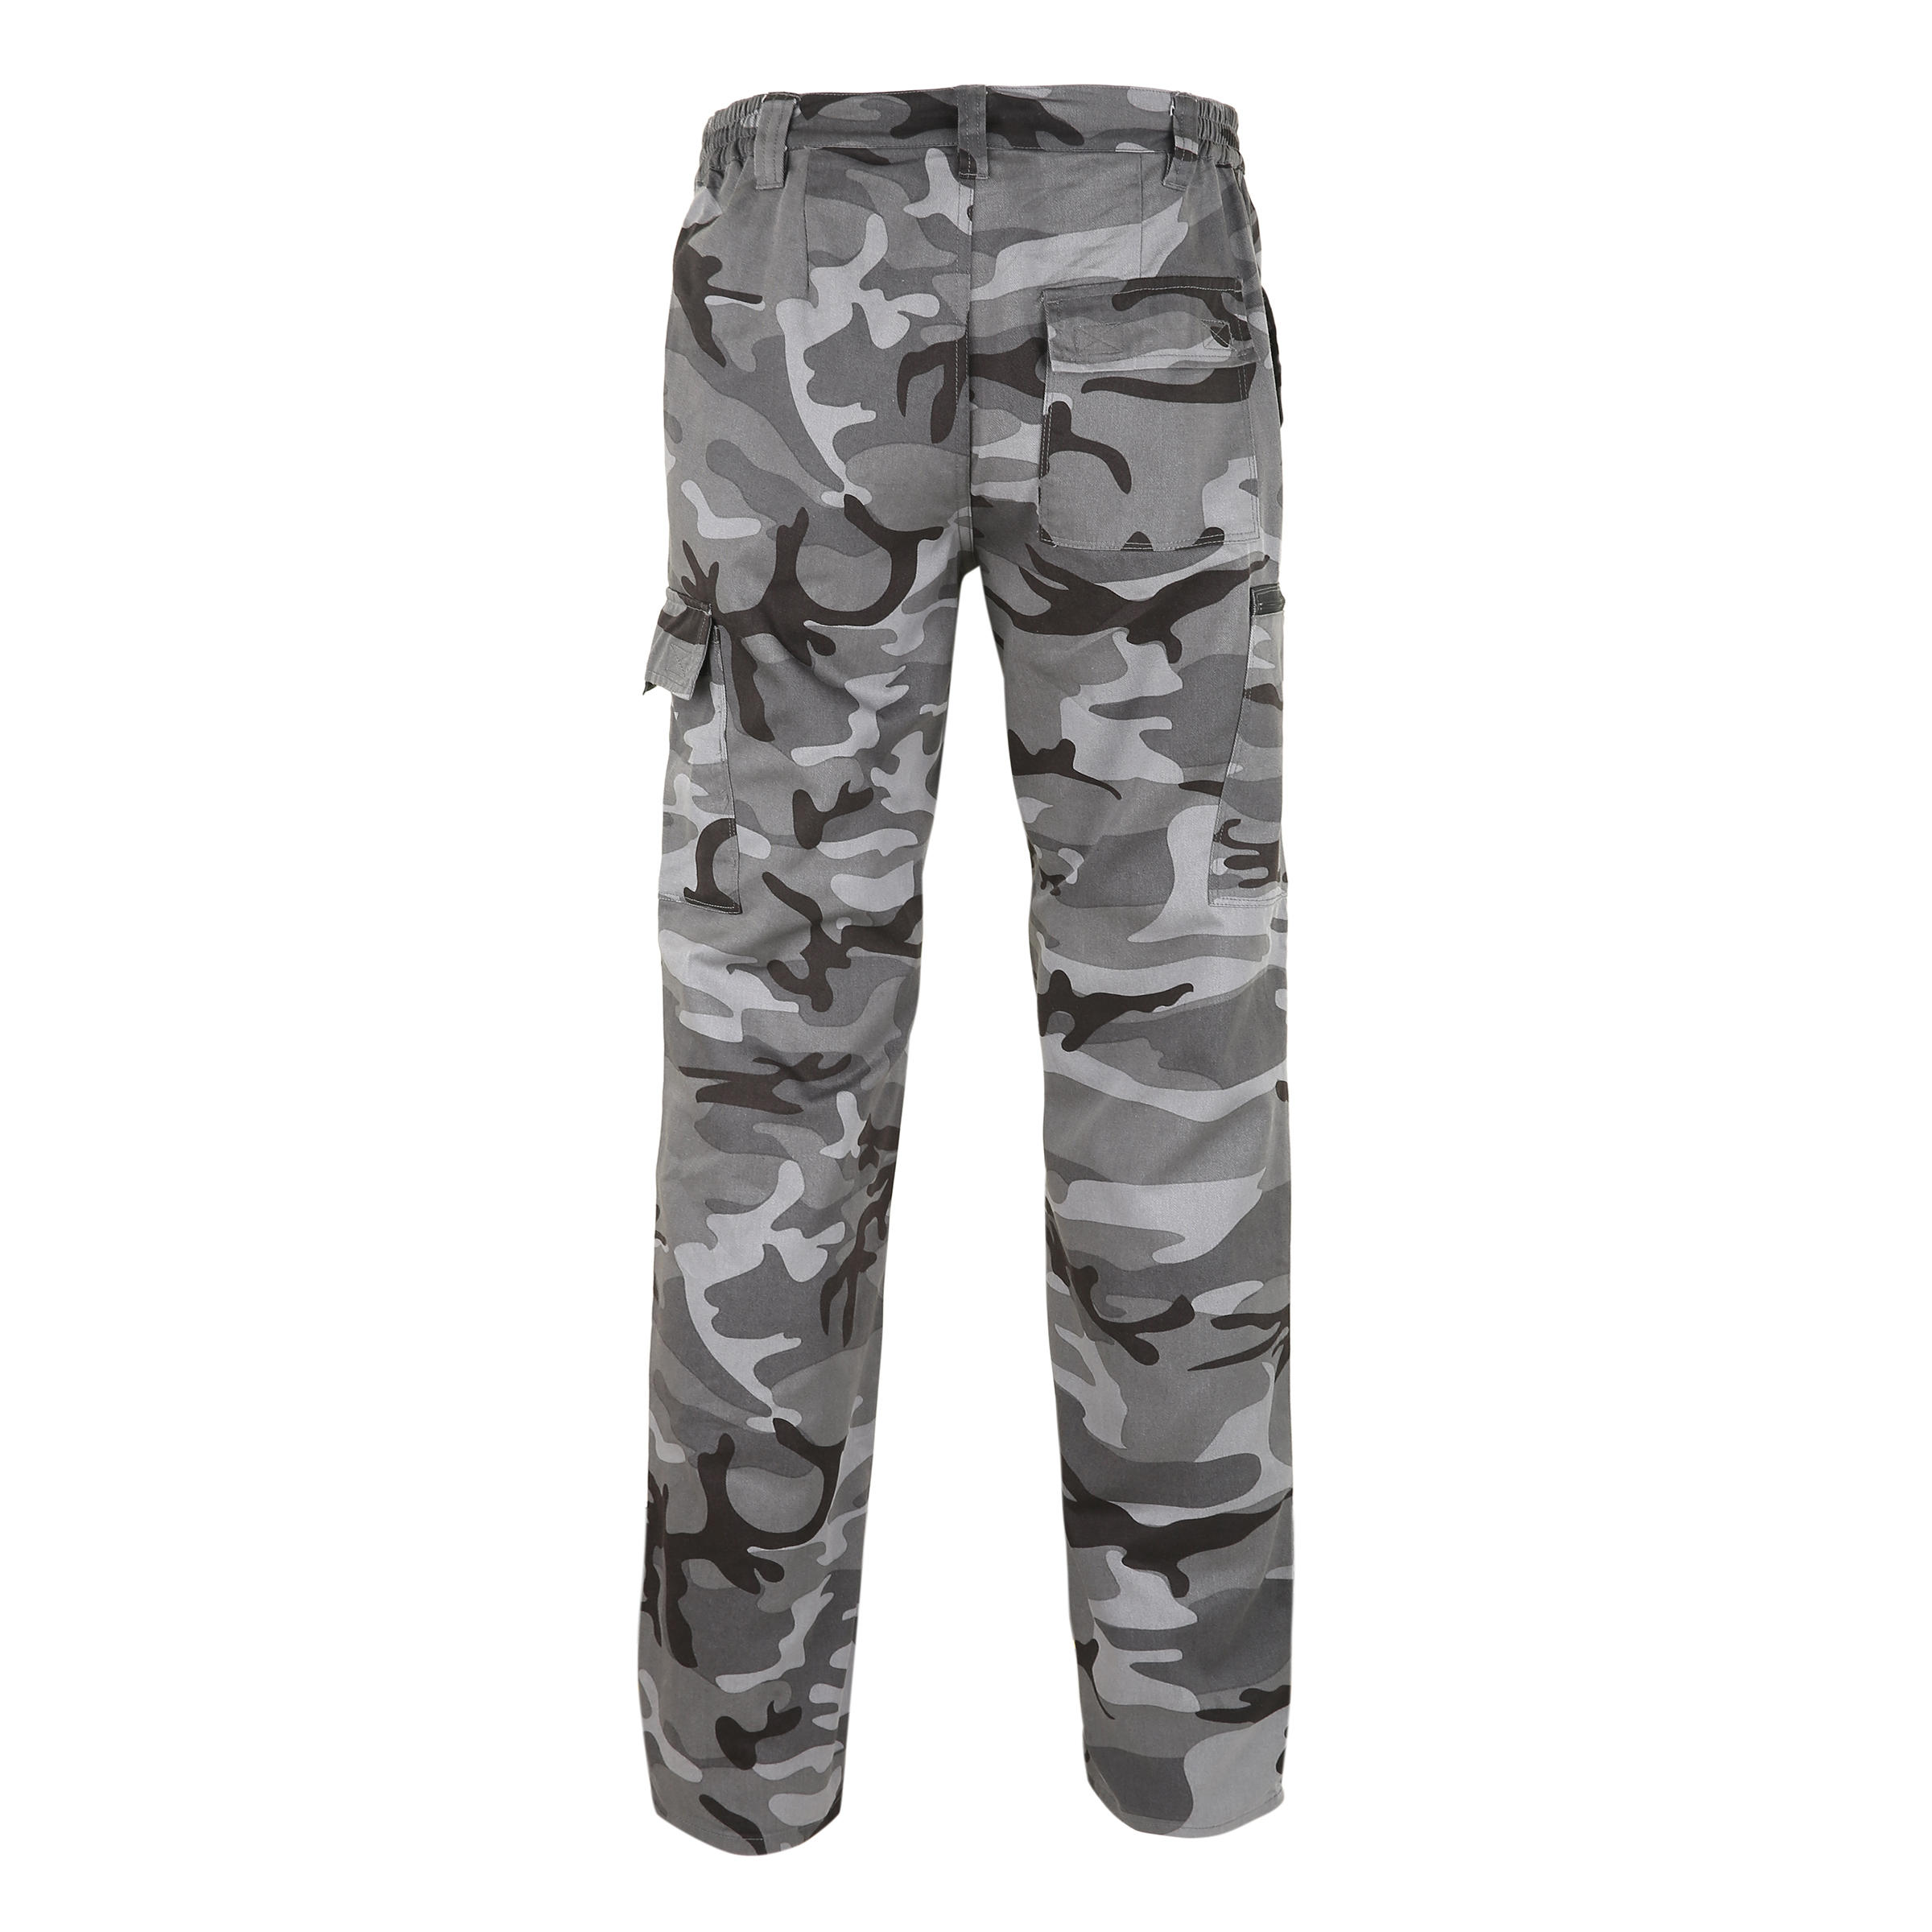 Shop for Camouflage Pants for Outdoor 